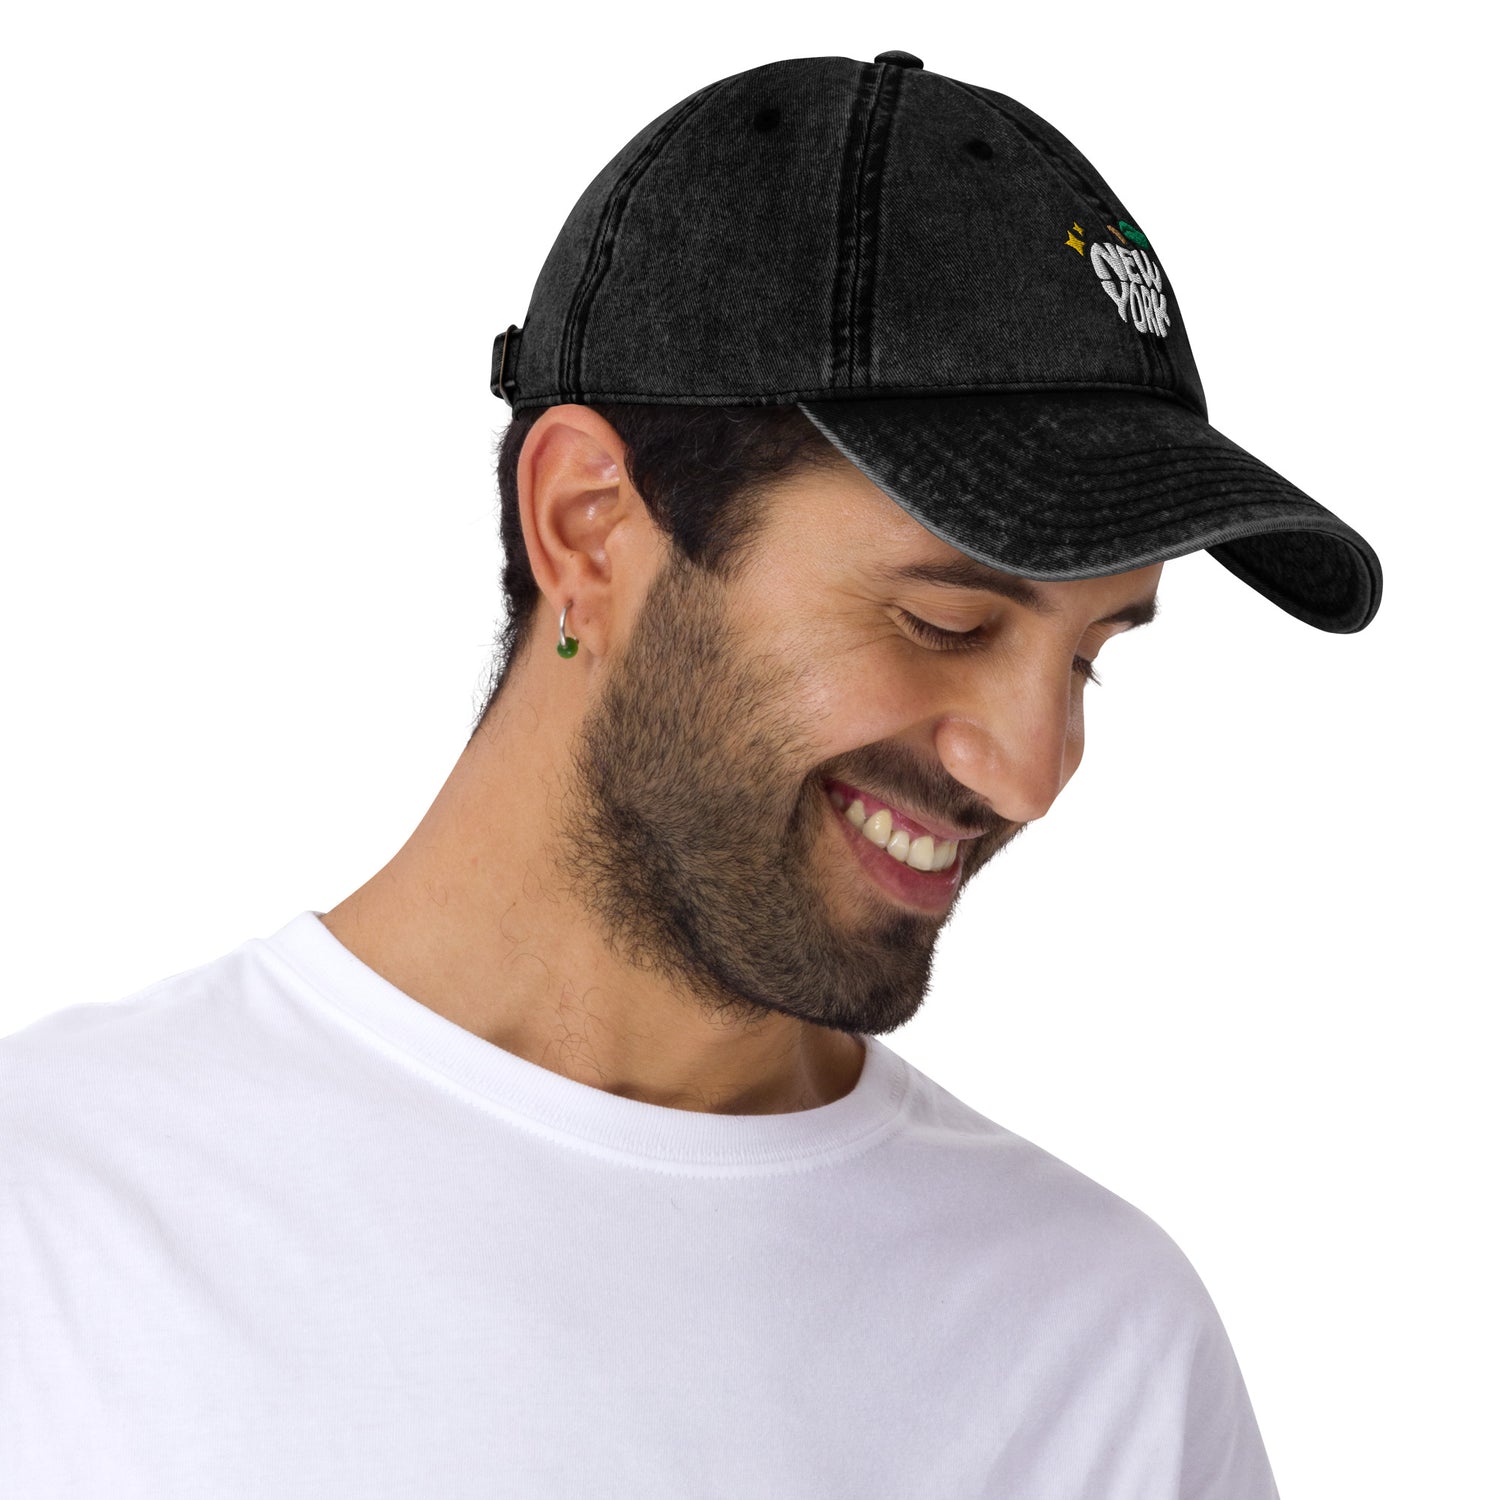 New York Apple Logo Embroidered Black Vintage Cotton Twill Hat Scattered Streetwear